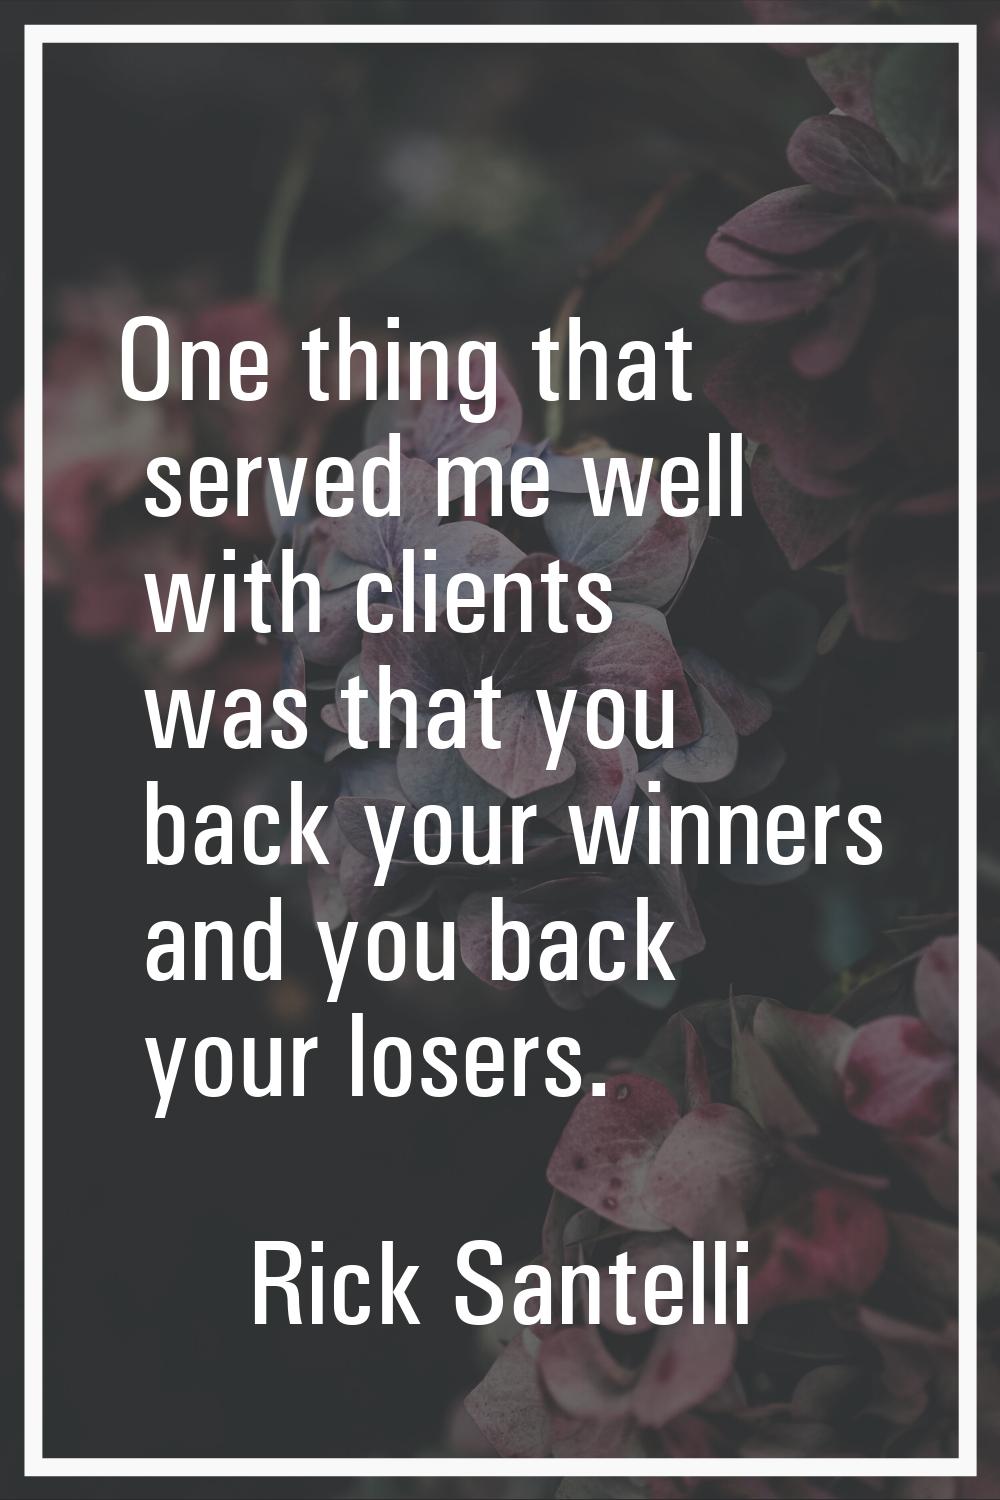 One thing that served me well with clients was that you back your winners and you back your losers.